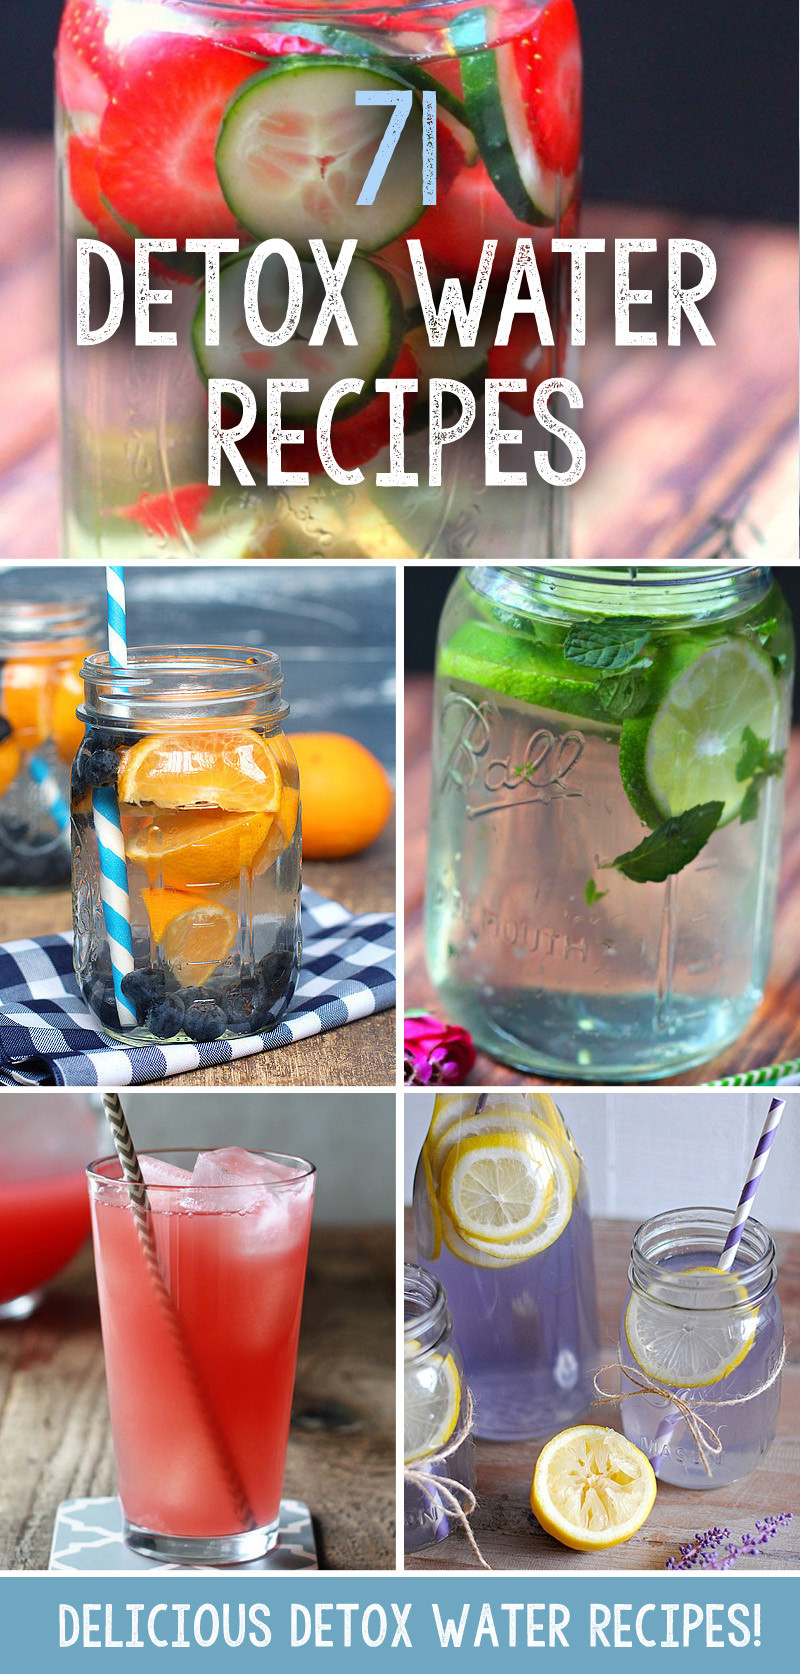 Quick Weight Loss Cleanse
 71 Delicious Detox Water Recipes To Help You Lose Weight Fast